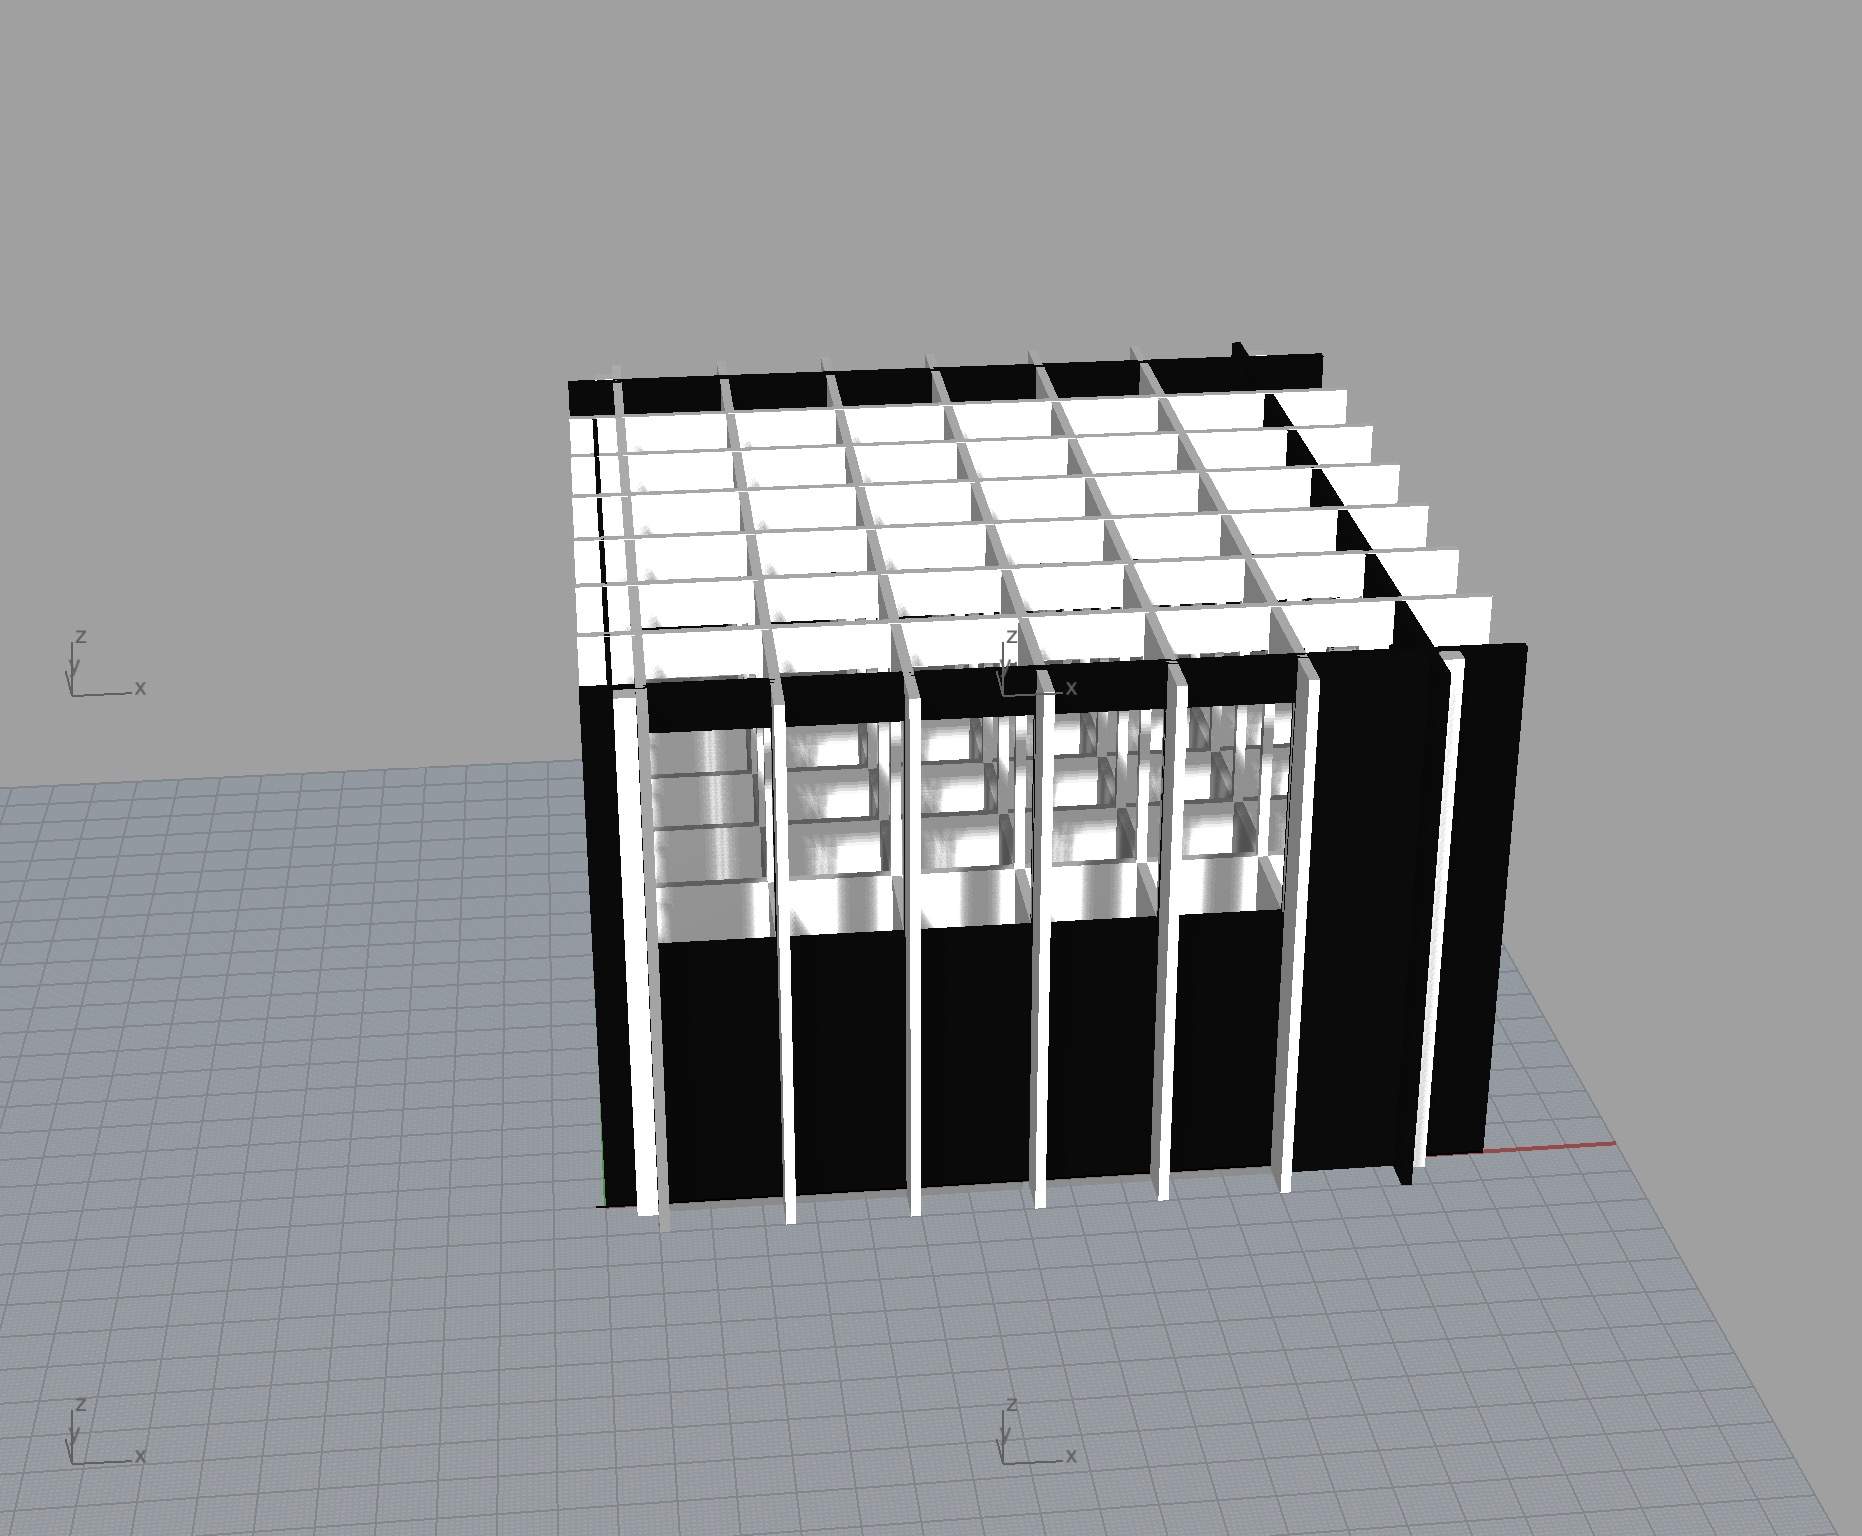 3D rendering of a black and white grid box